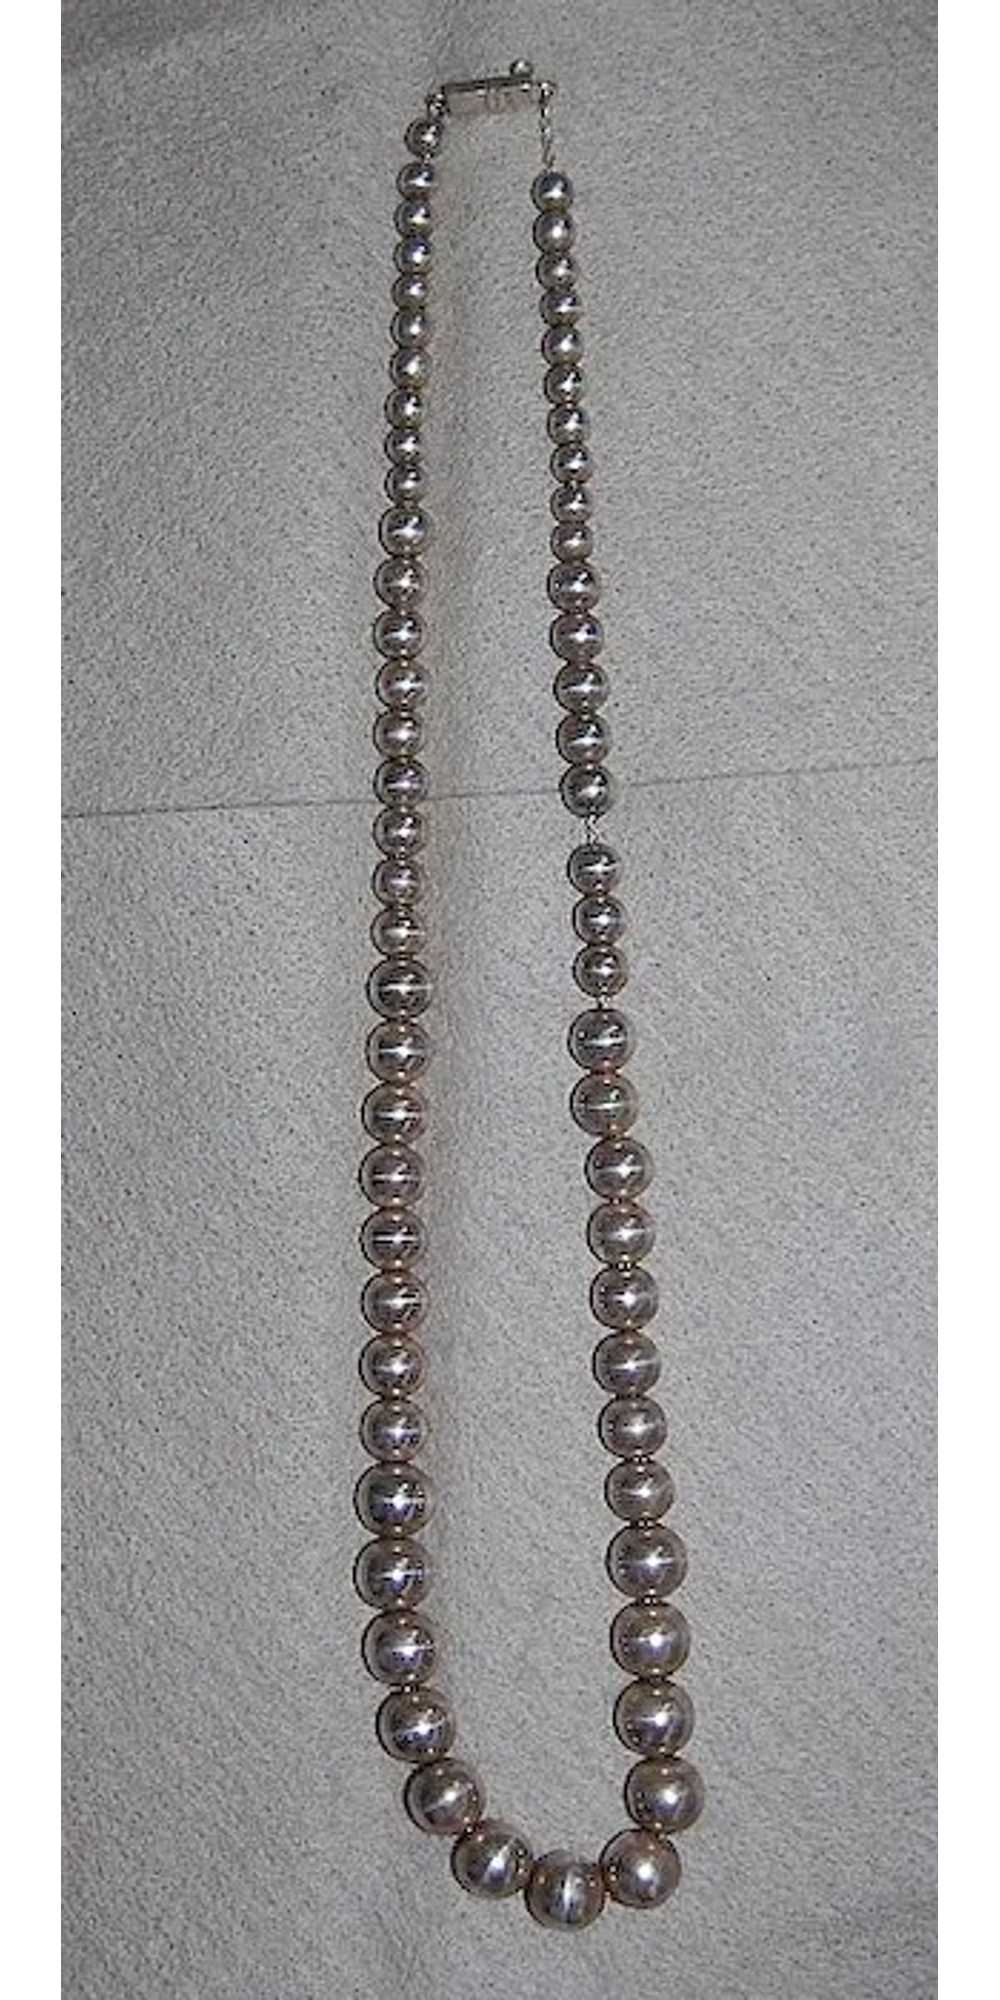 Vintage MEXICAN STERLING Bead Necklace  (28" long) - image 4